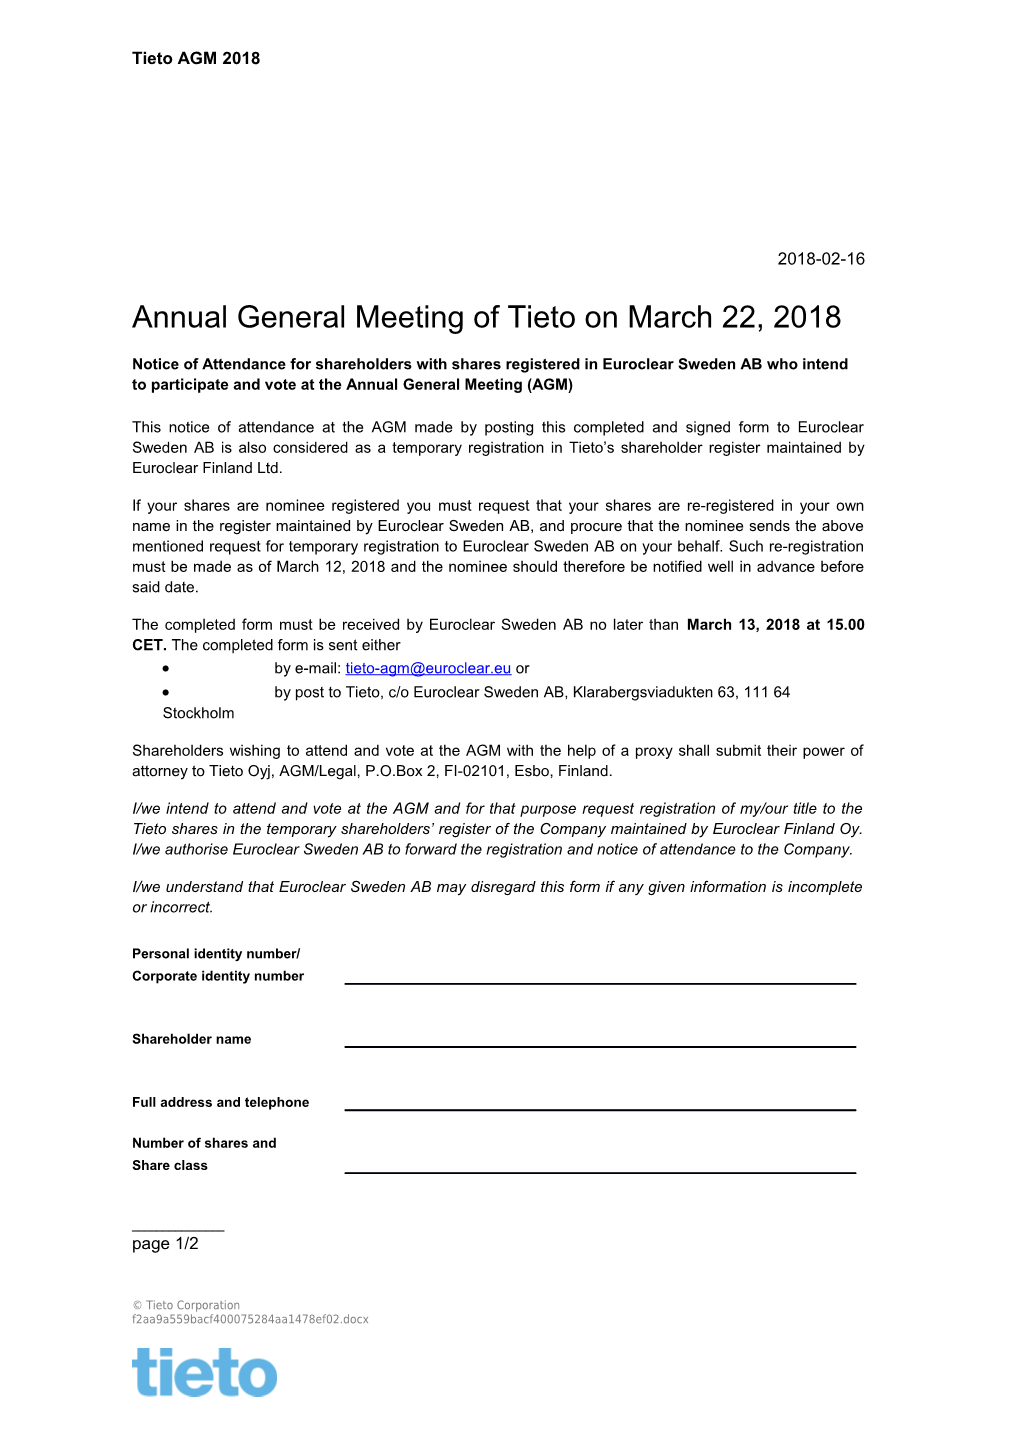 Annual General Meeting of Tieto Onmarch 22, 2018